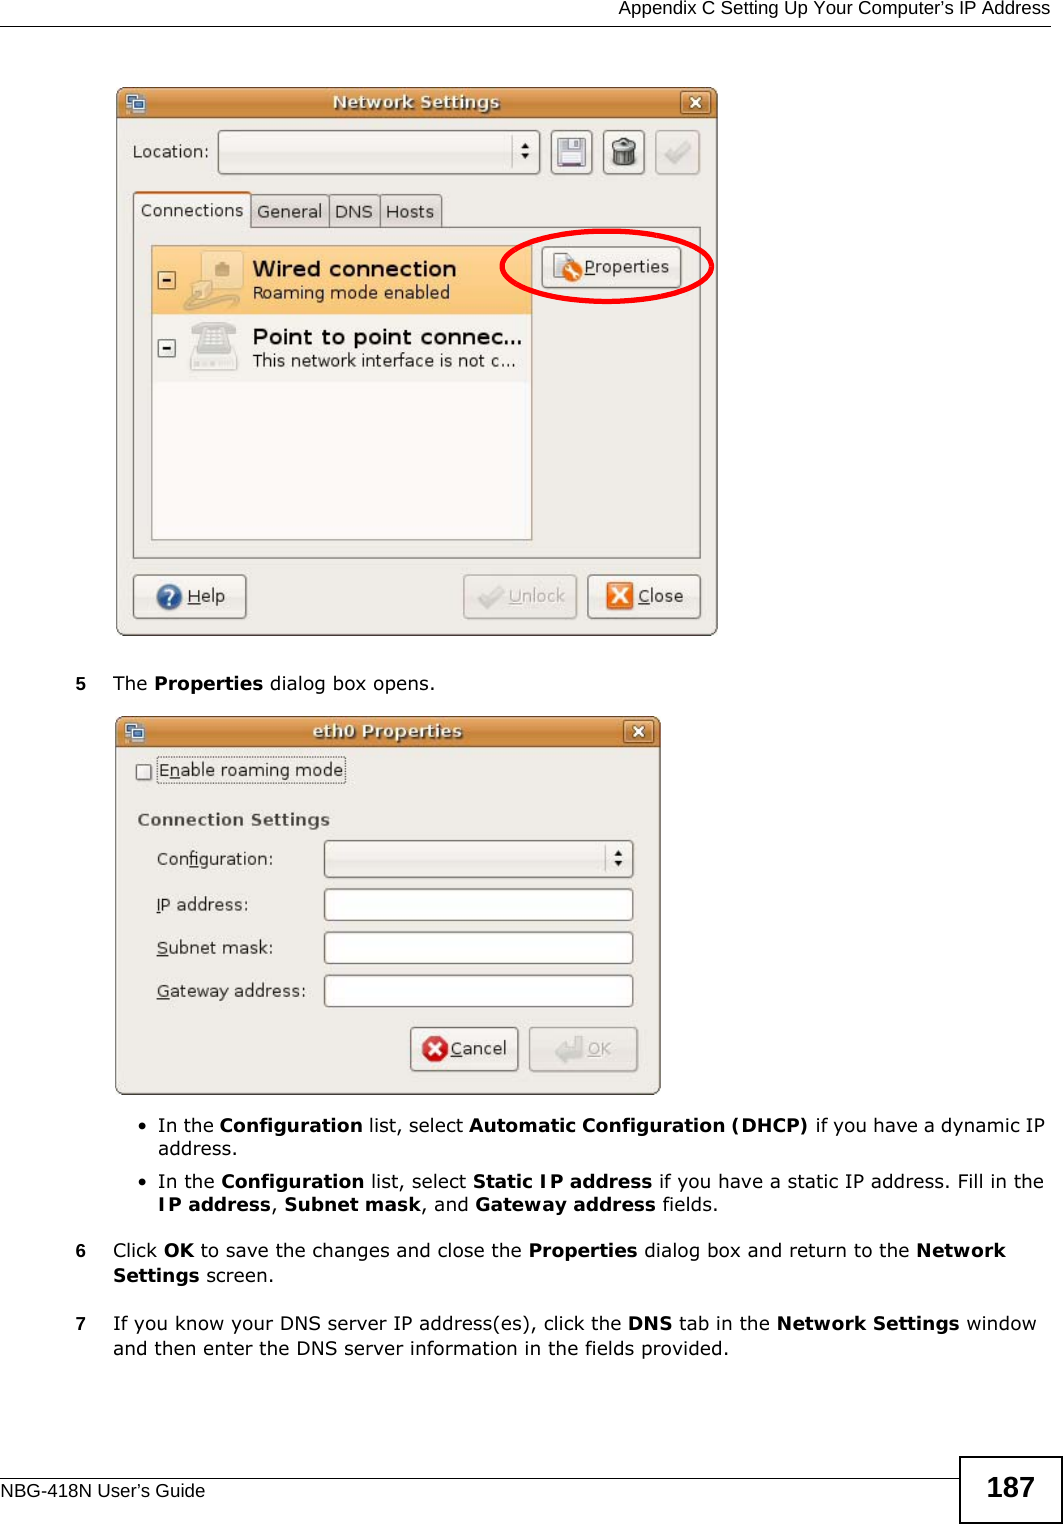  Appendix C Setting Up Your Computer’s IP AddressNBG-418N User’s Guide 1875The Properties dialog box opens.•In the Configuration list, select Automatic Configuration (DHCP) if you have a dynamic IP address.•In the Configuration list, select Static IP address if you have a static IP address. Fill in the IP address, Subnet mask, and Gateway address fields. 6Click OK to save the changes and close the Properties dialog box and return to the Network Settings screen. 7If you know your DNS server IP address(es), click the DNS tab in the Network Settings window and then enter the DNS server information in the fields provided. 